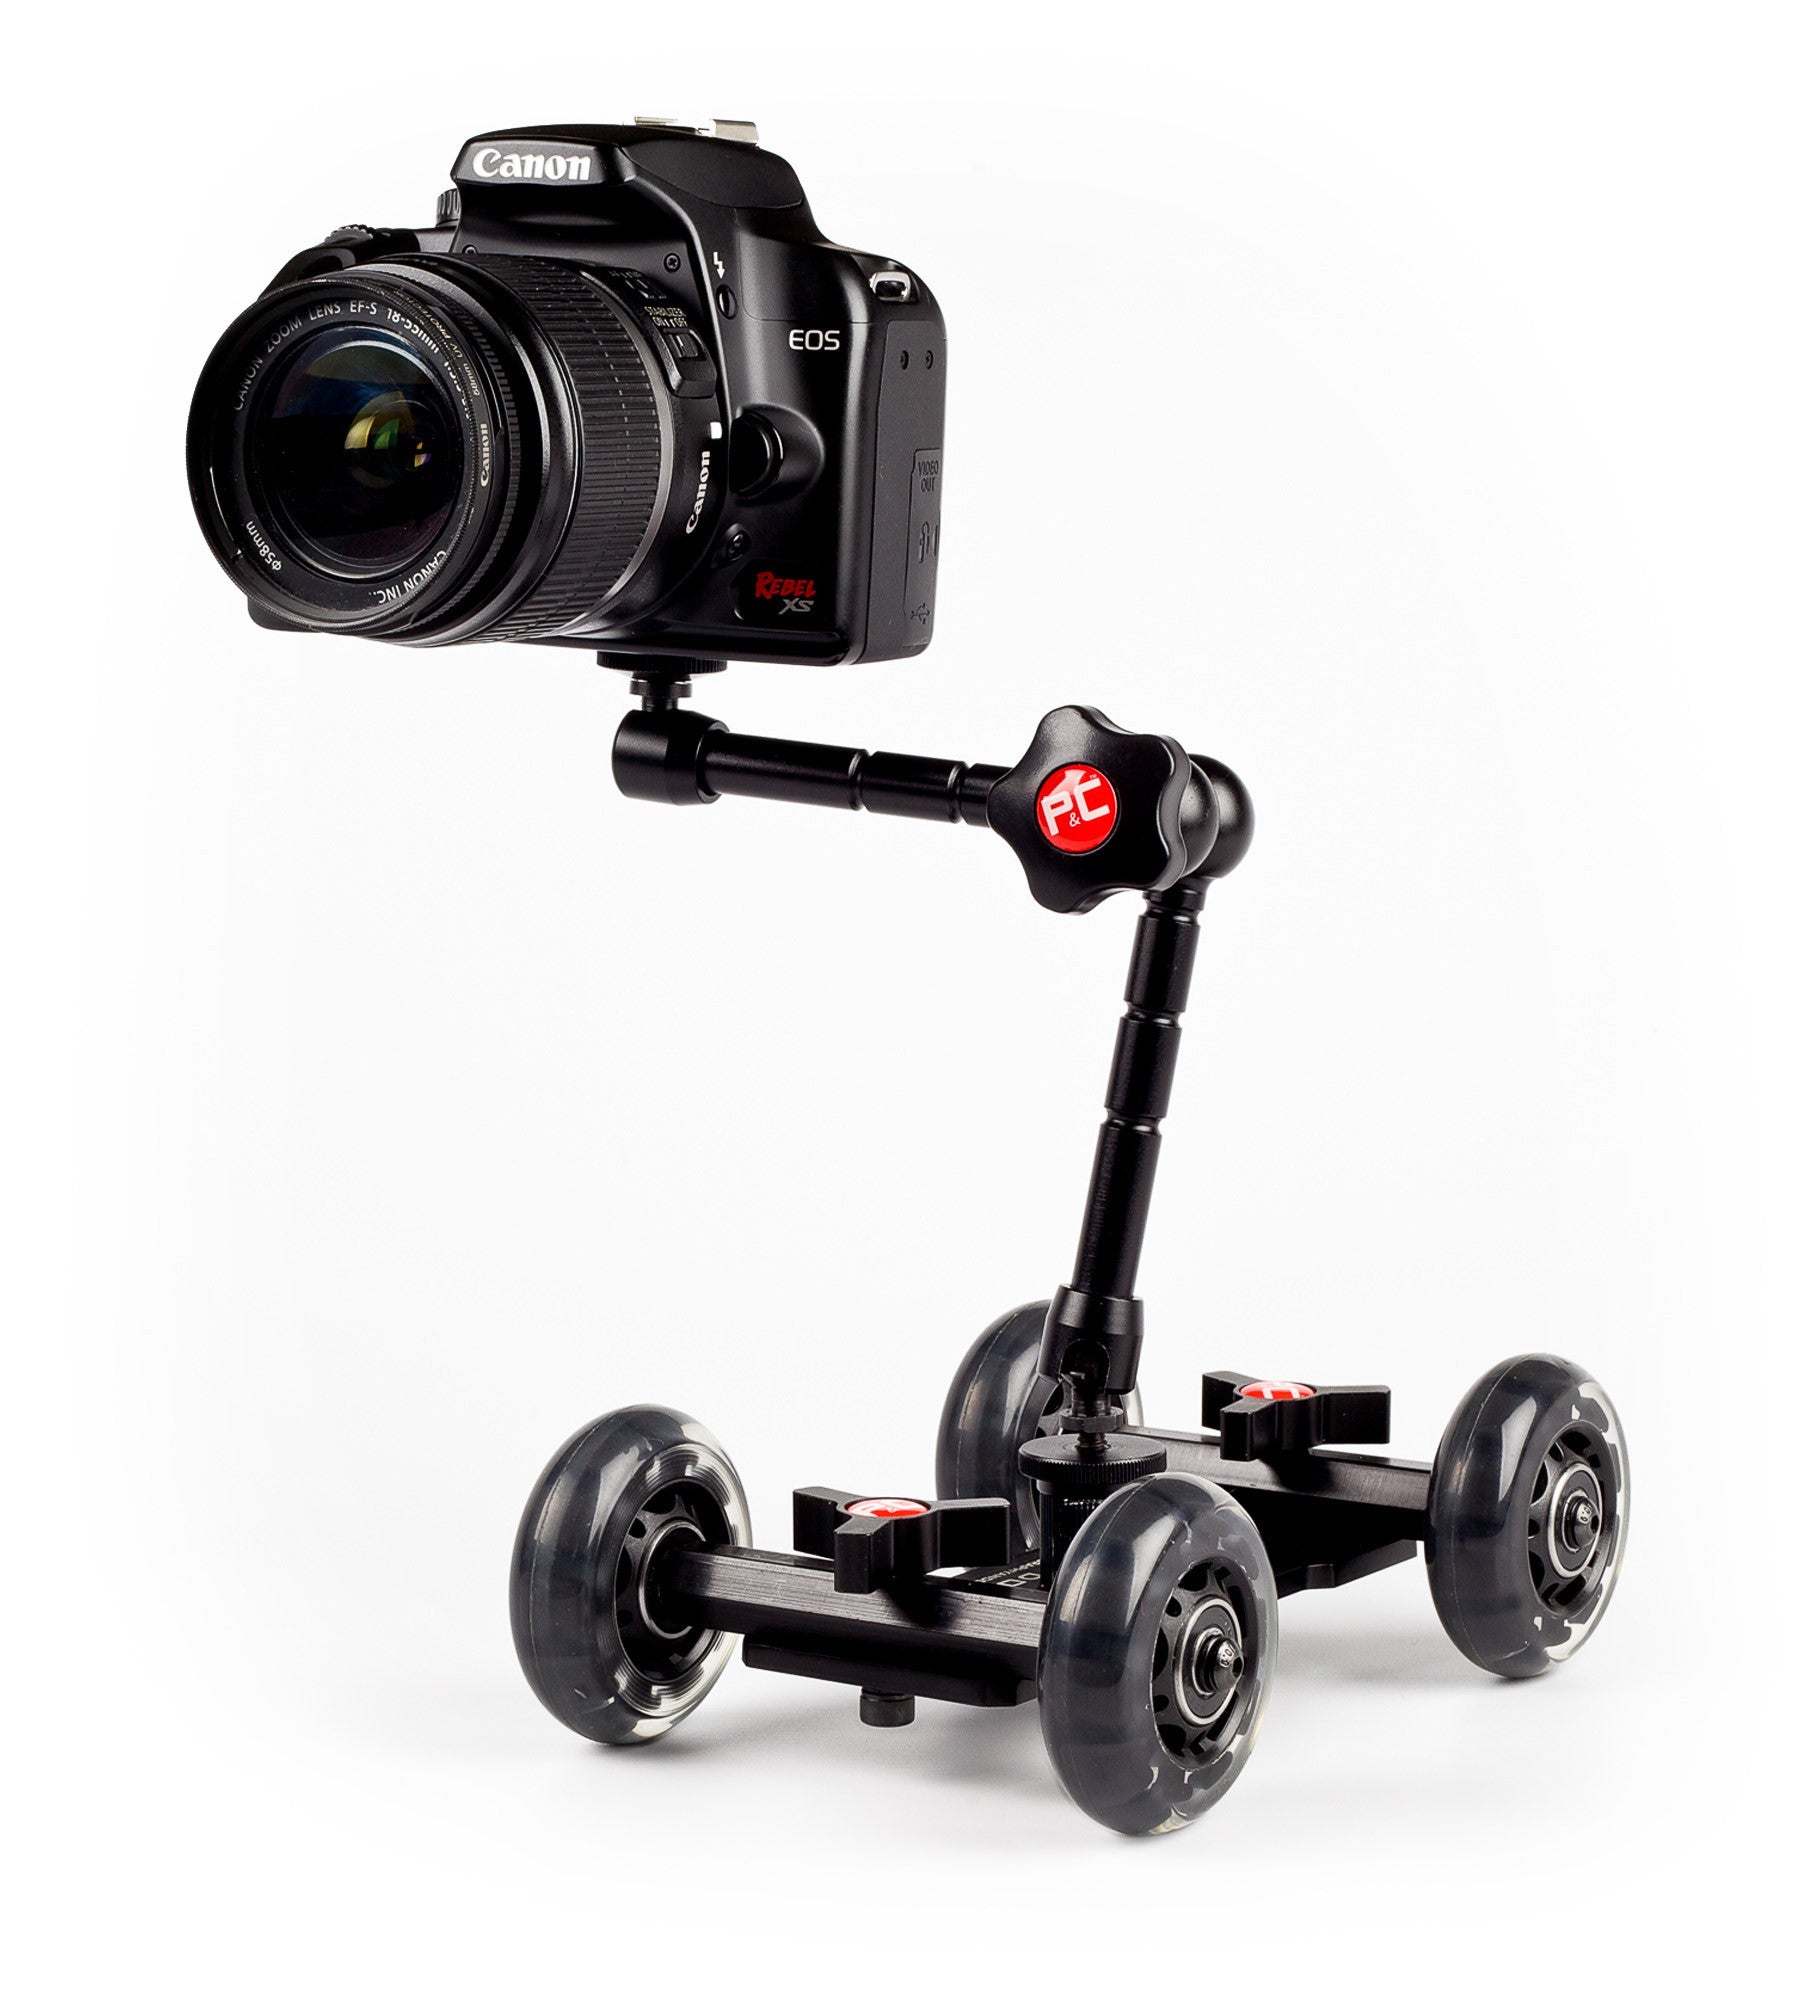 Pico Flex Table Dolly Kit, video stabilizer systems, Dot Line - Pictureline  - 1